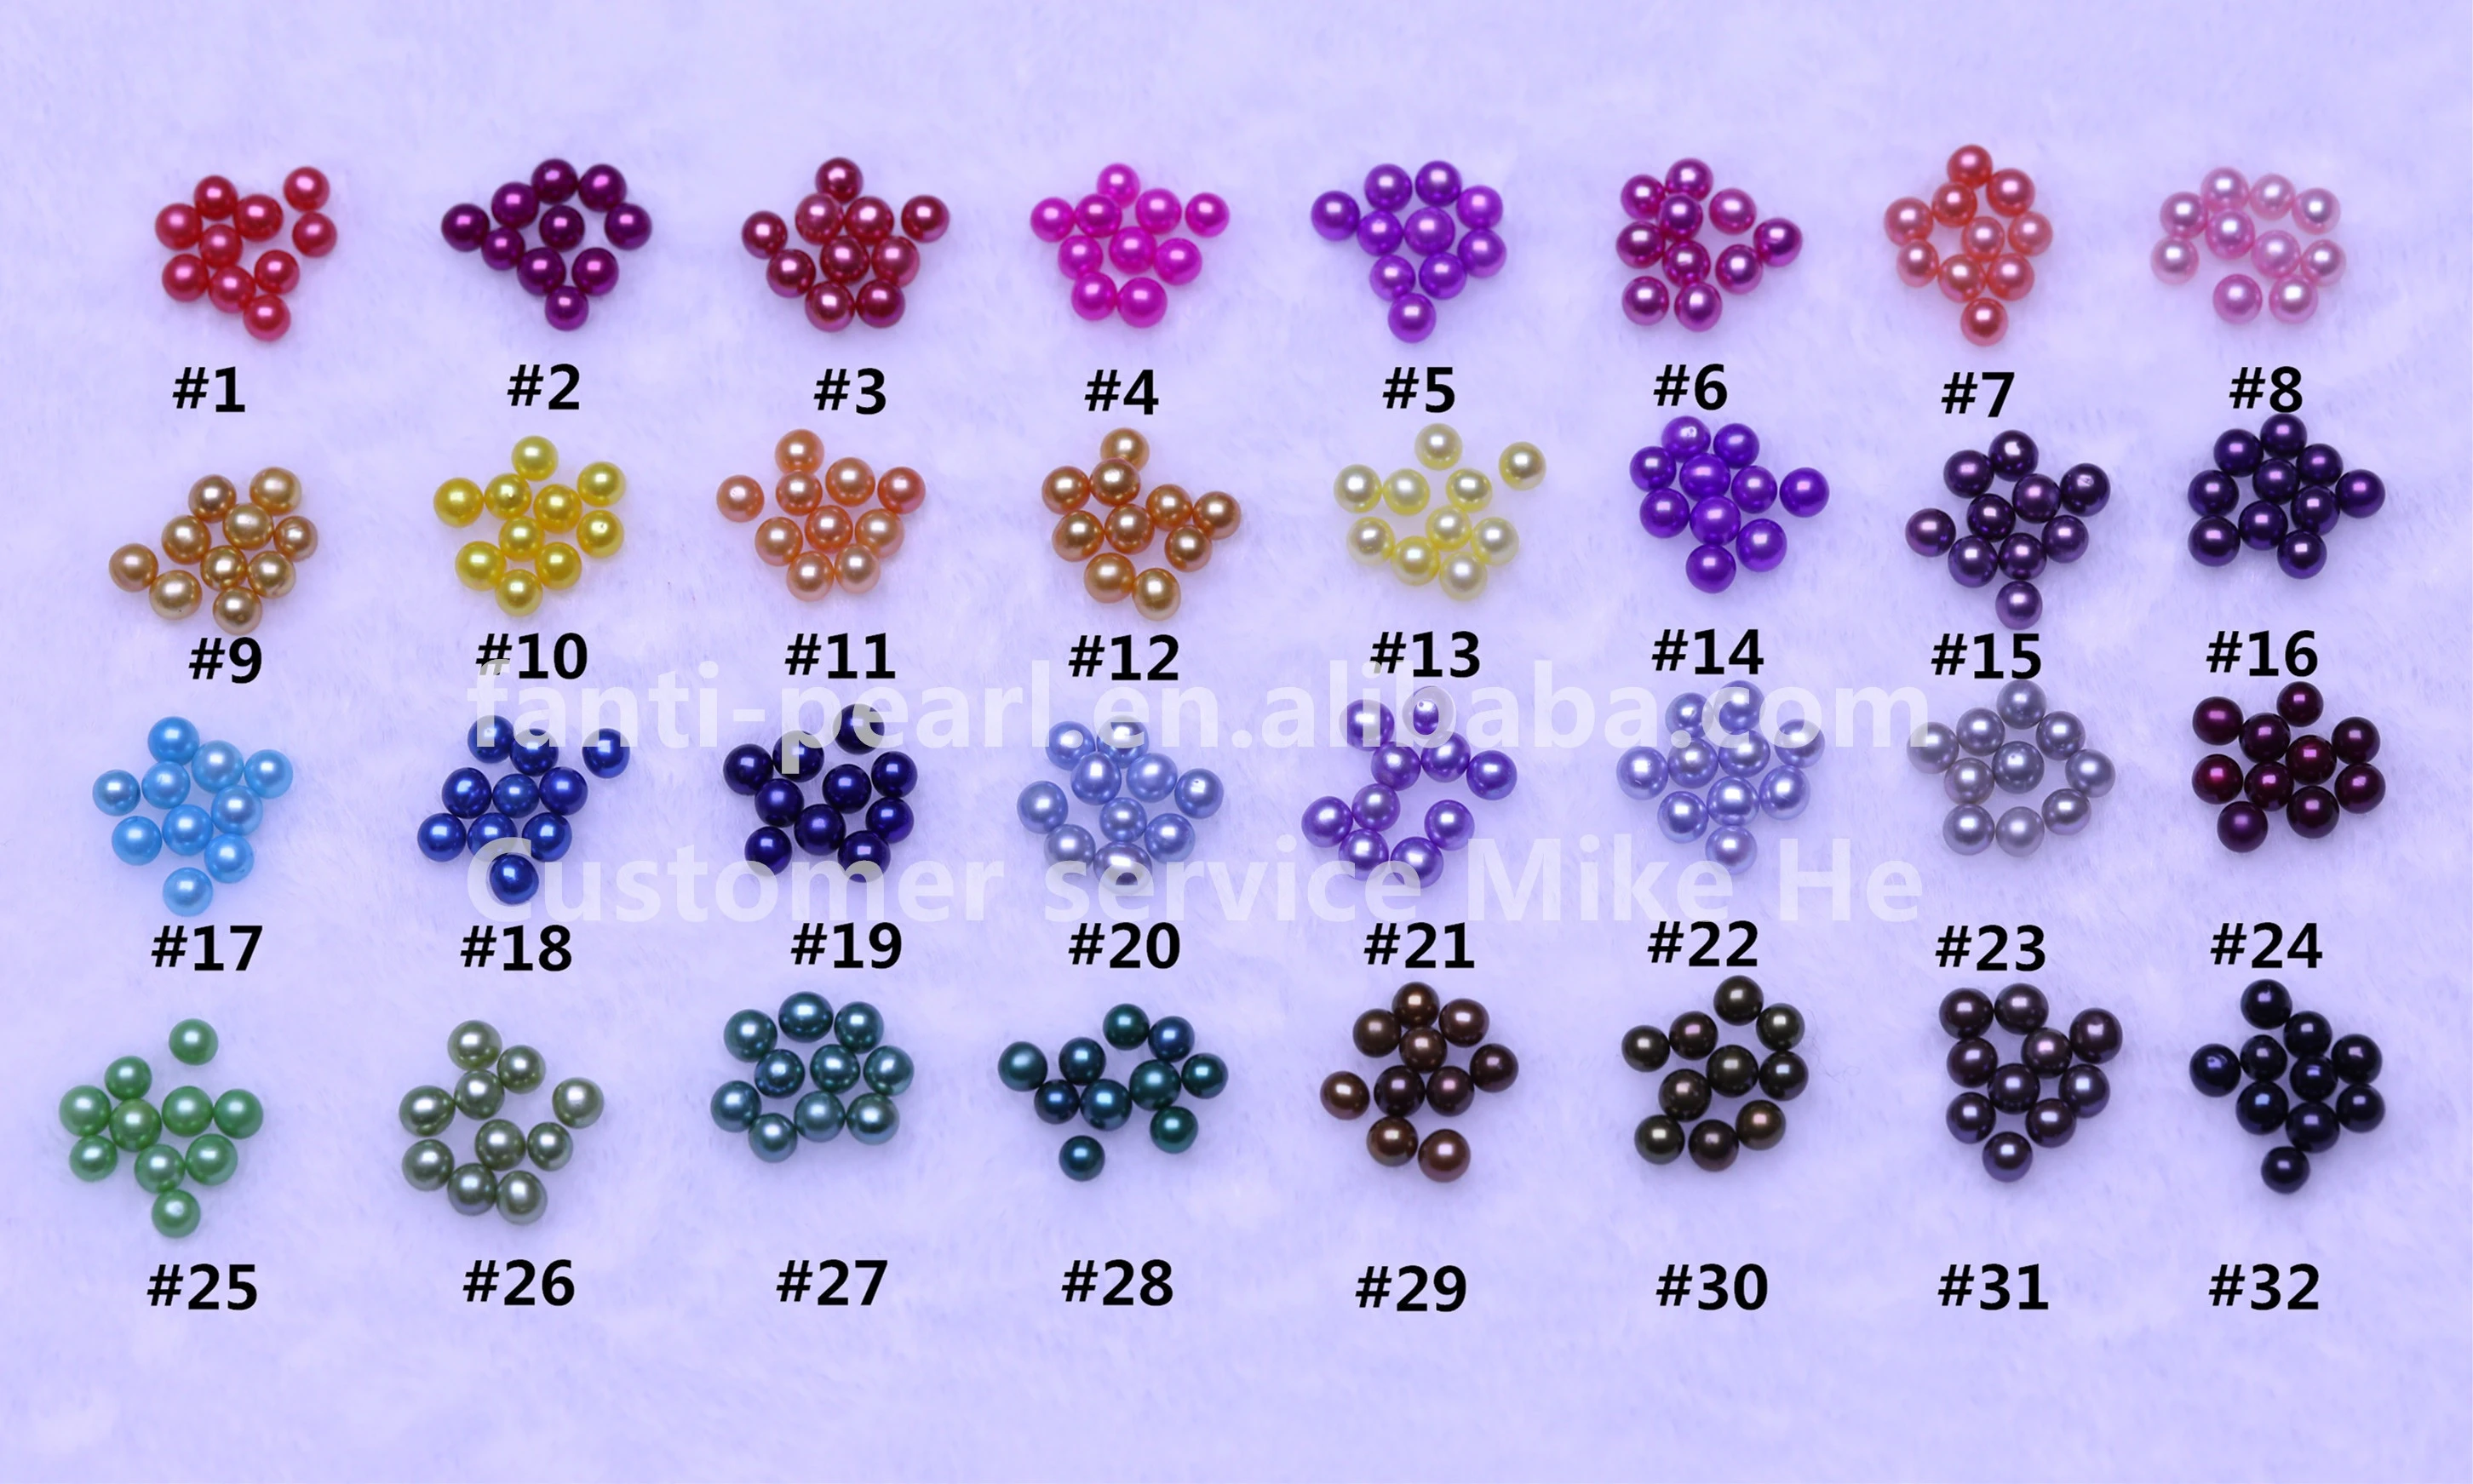 32 colors Akoya pearl oyster,6-7mm AAA grade round freshwater pearl single mussel,rainbow color natural pearl